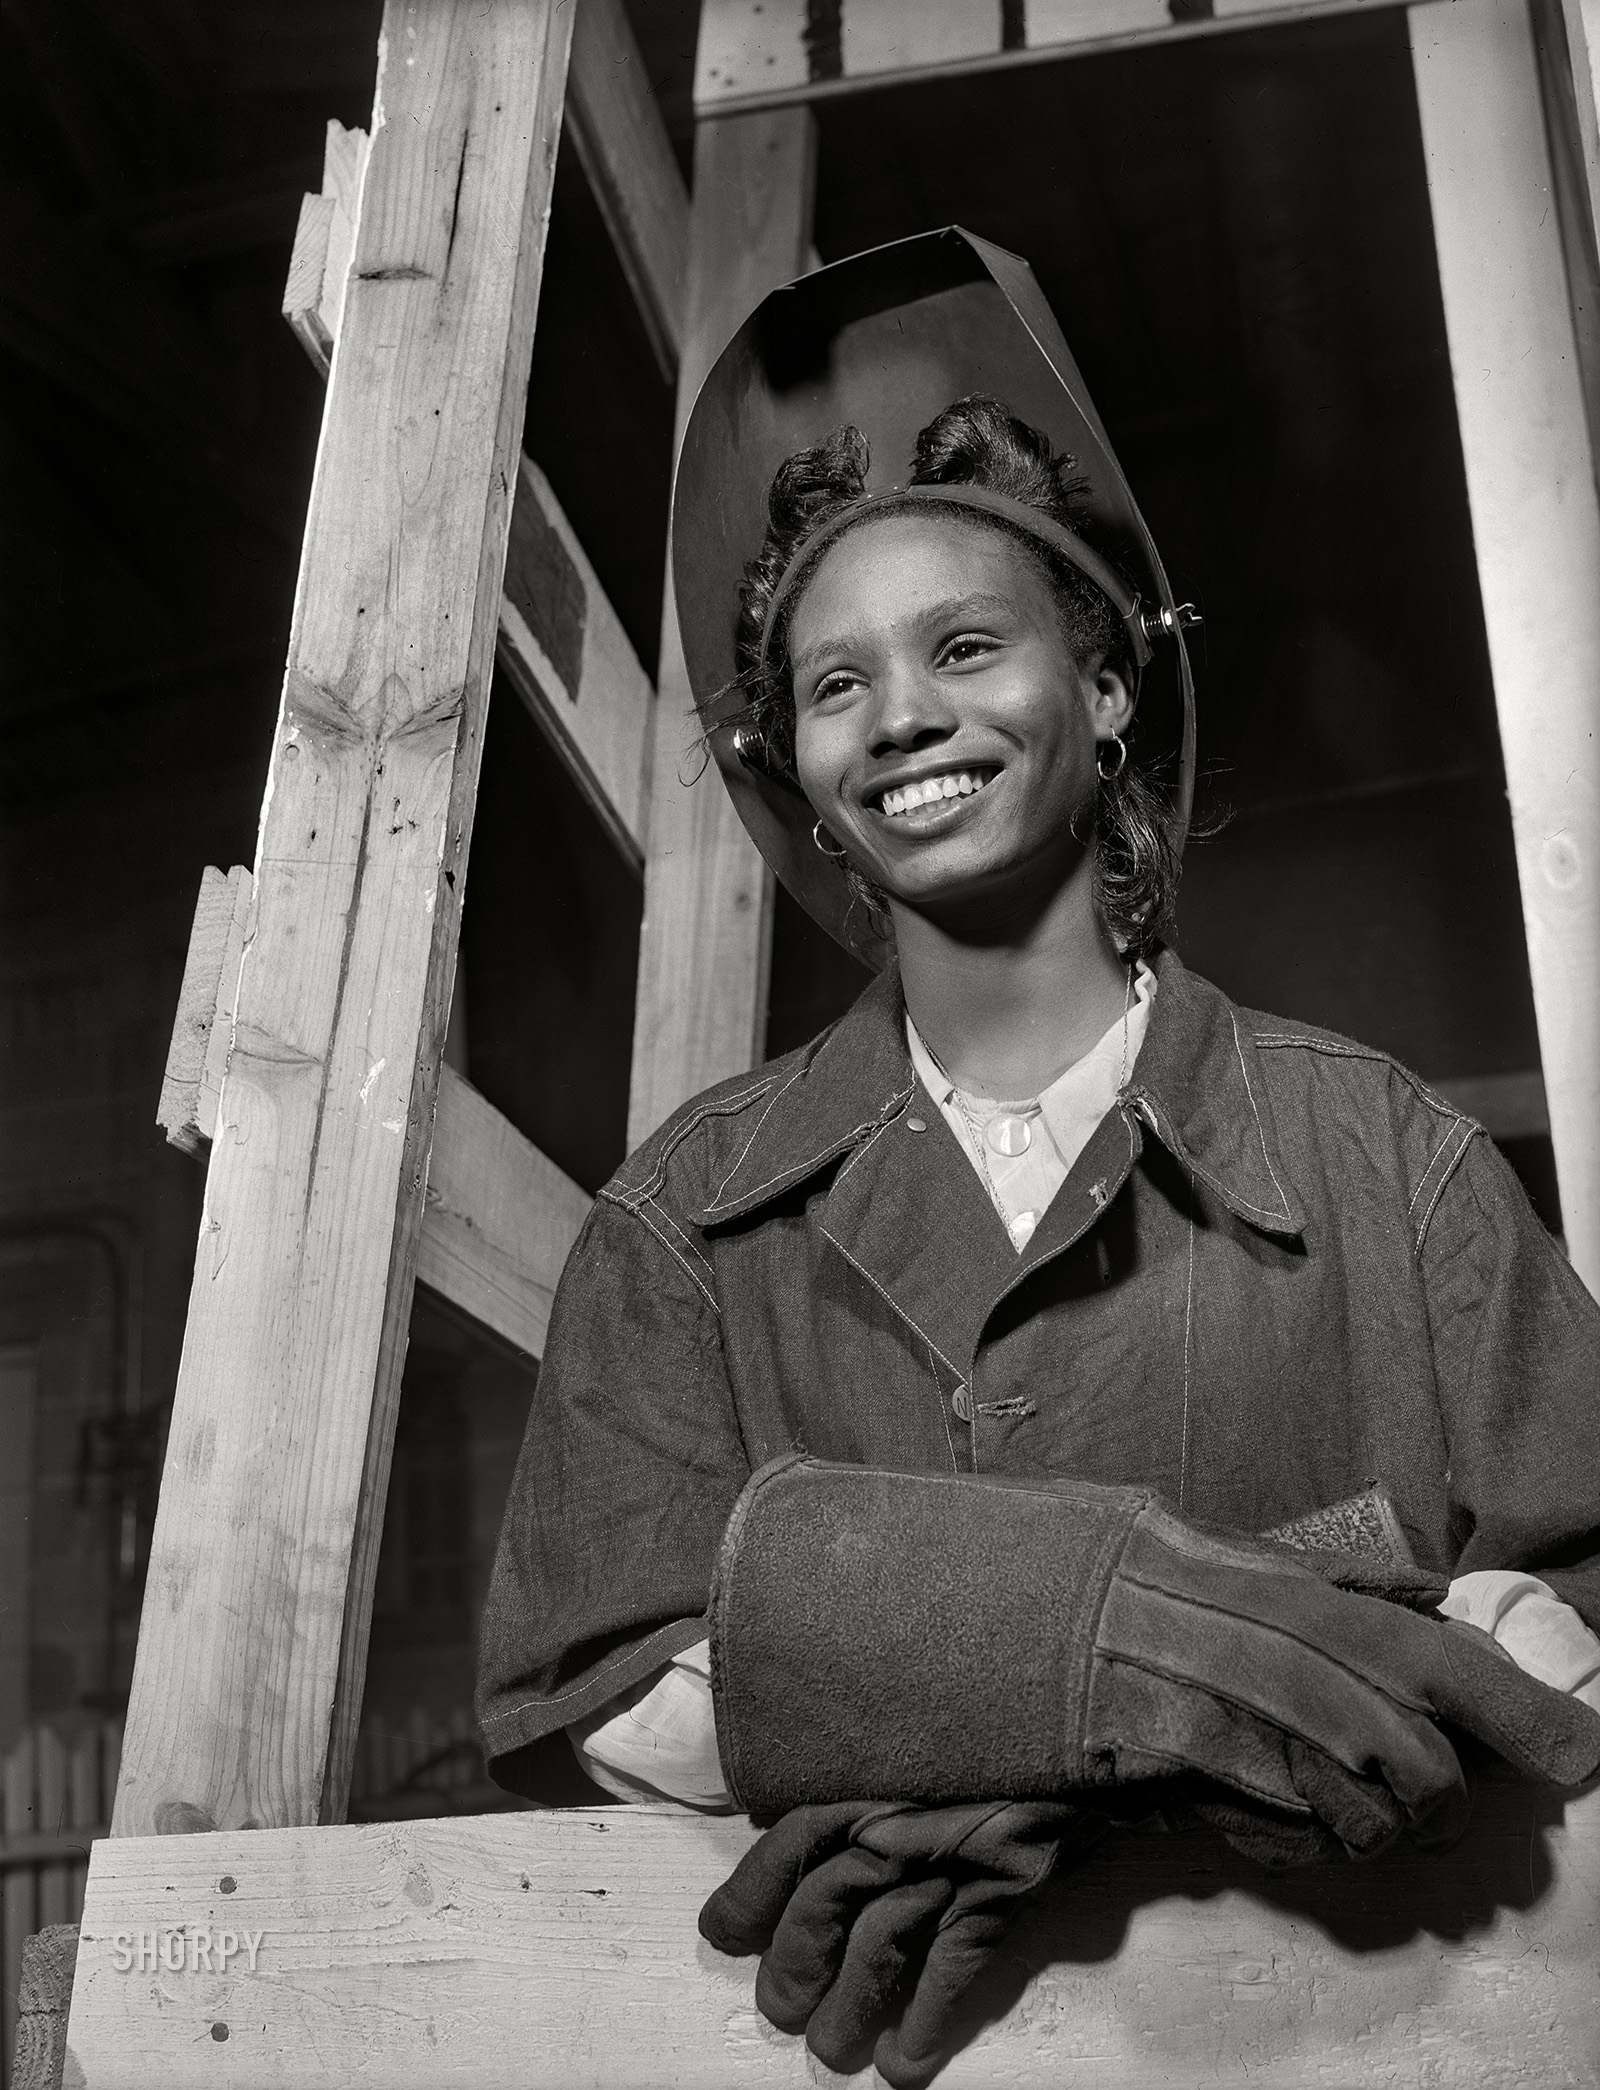 January 1943. "Daytona Beach, Florida. Bethune-Cookman College. Girl welder in the National Youth Administration school." Photo by Gordon Parks, Office of War Information. View full size.